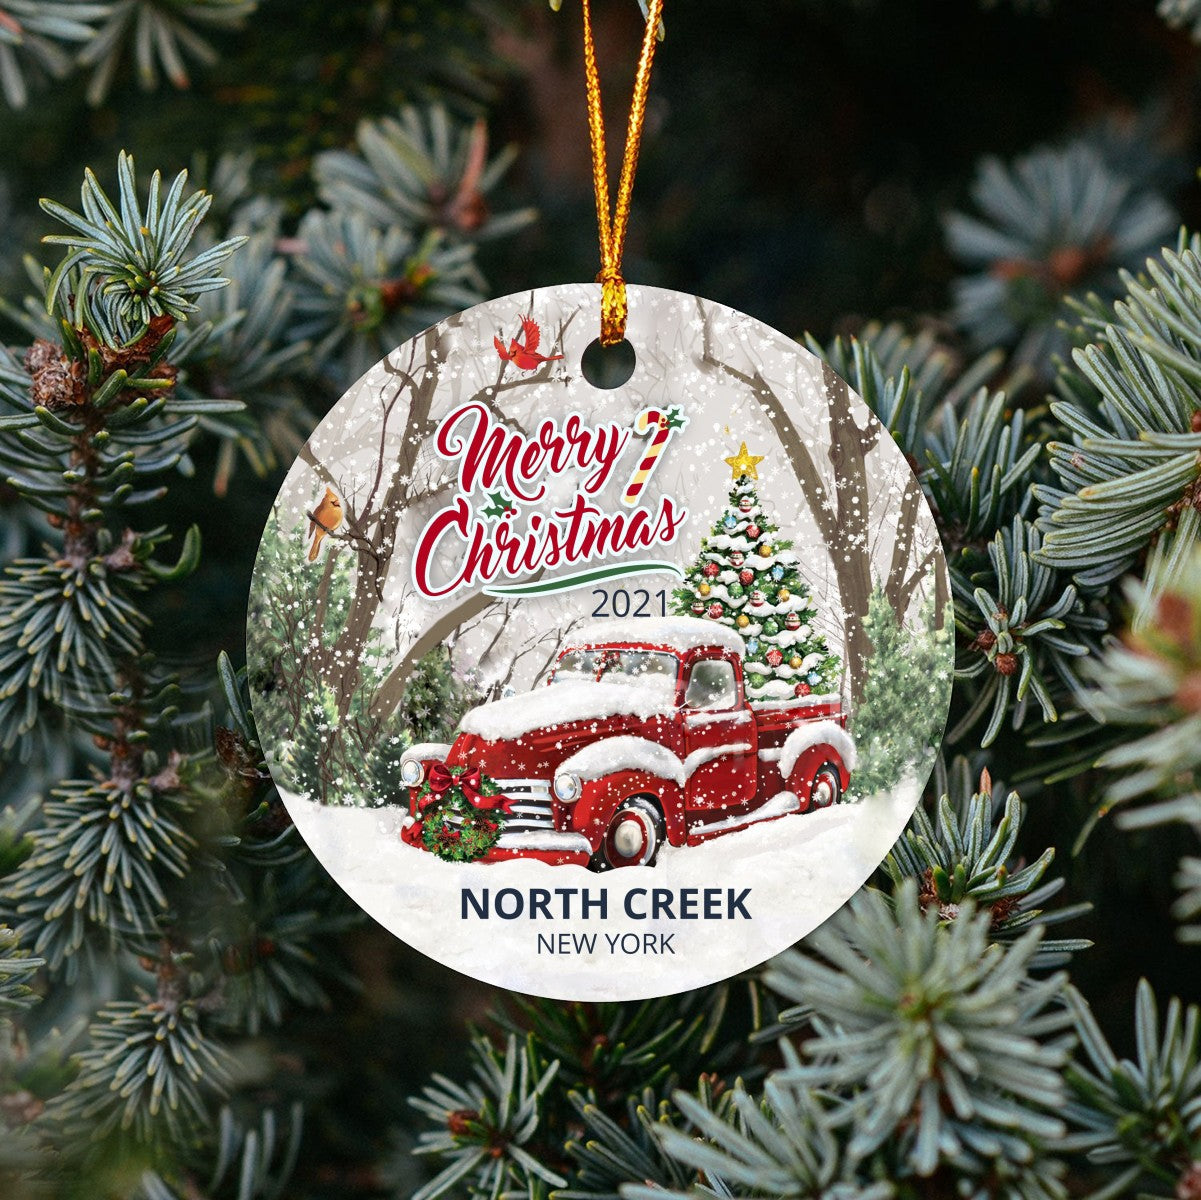 Christmas Tree Ornaments North Creek - Ornament With Name City, State North Creek New York NY Ornament - Red Truck Xmas Ornaments 3'' Plastic Gift For Family, Friend And Housewarming